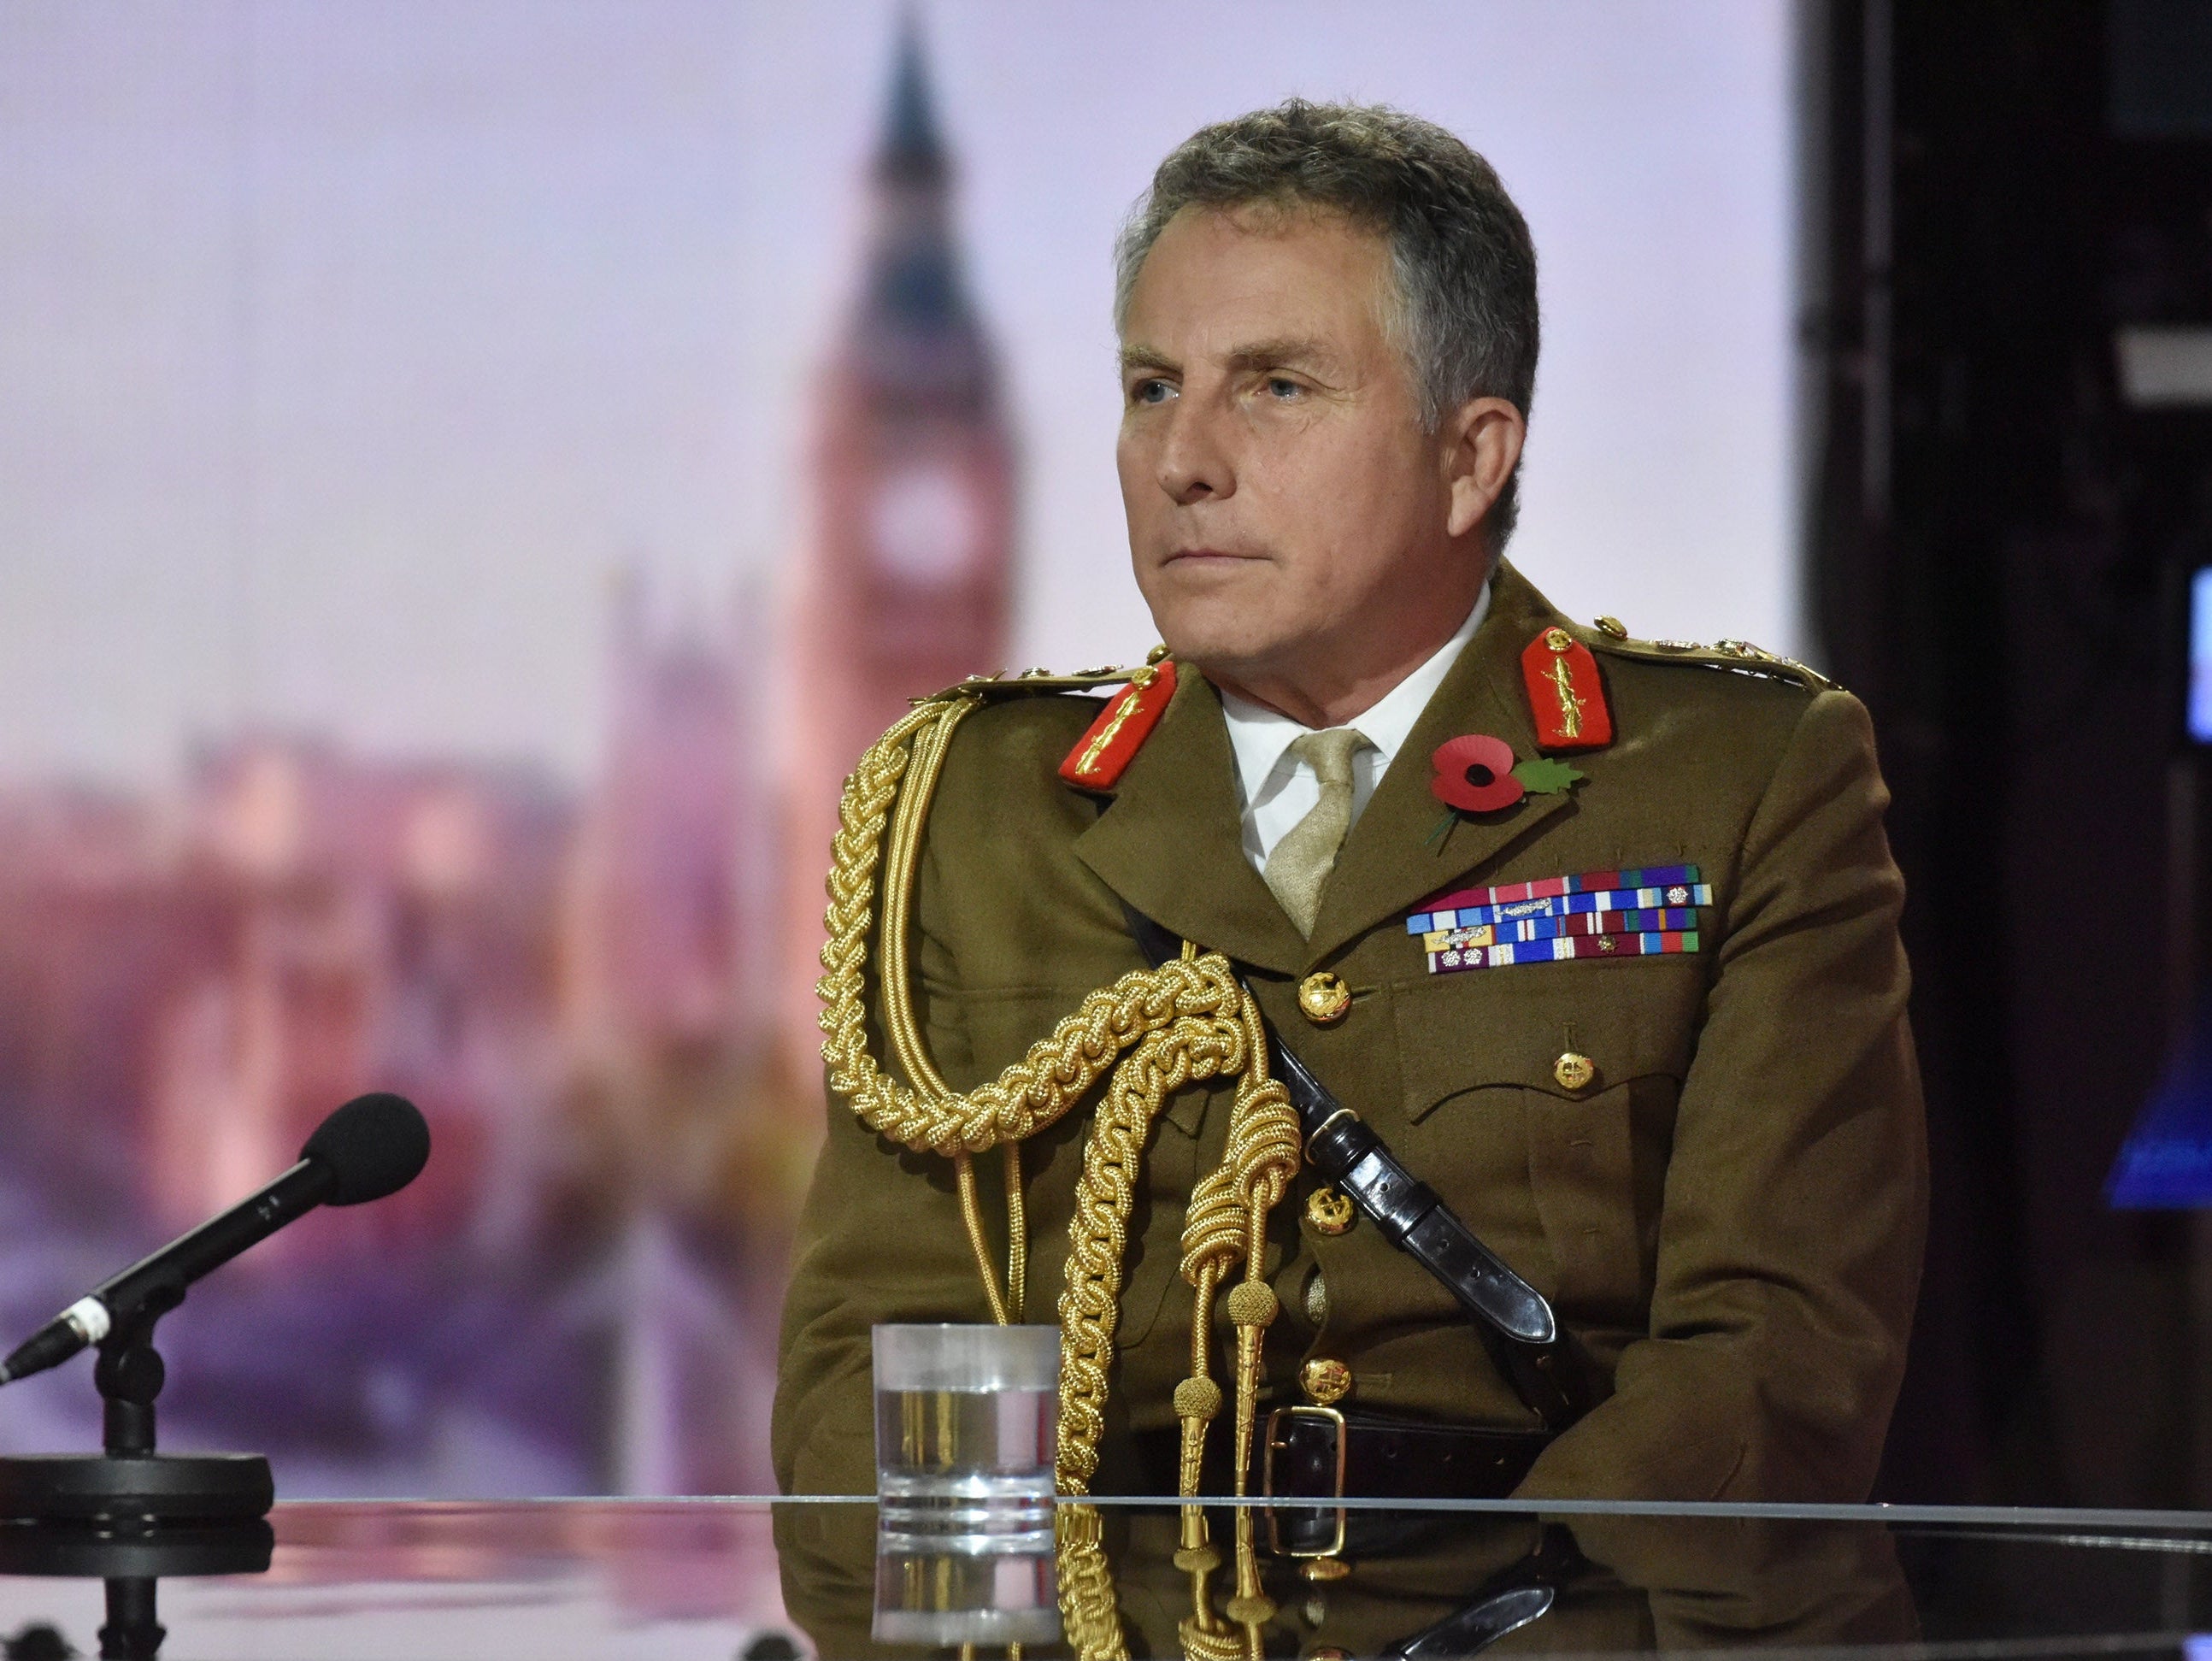 General Sir Nick Carter has predicted that the British armed forces will look ‘very different’ over the next 10 years